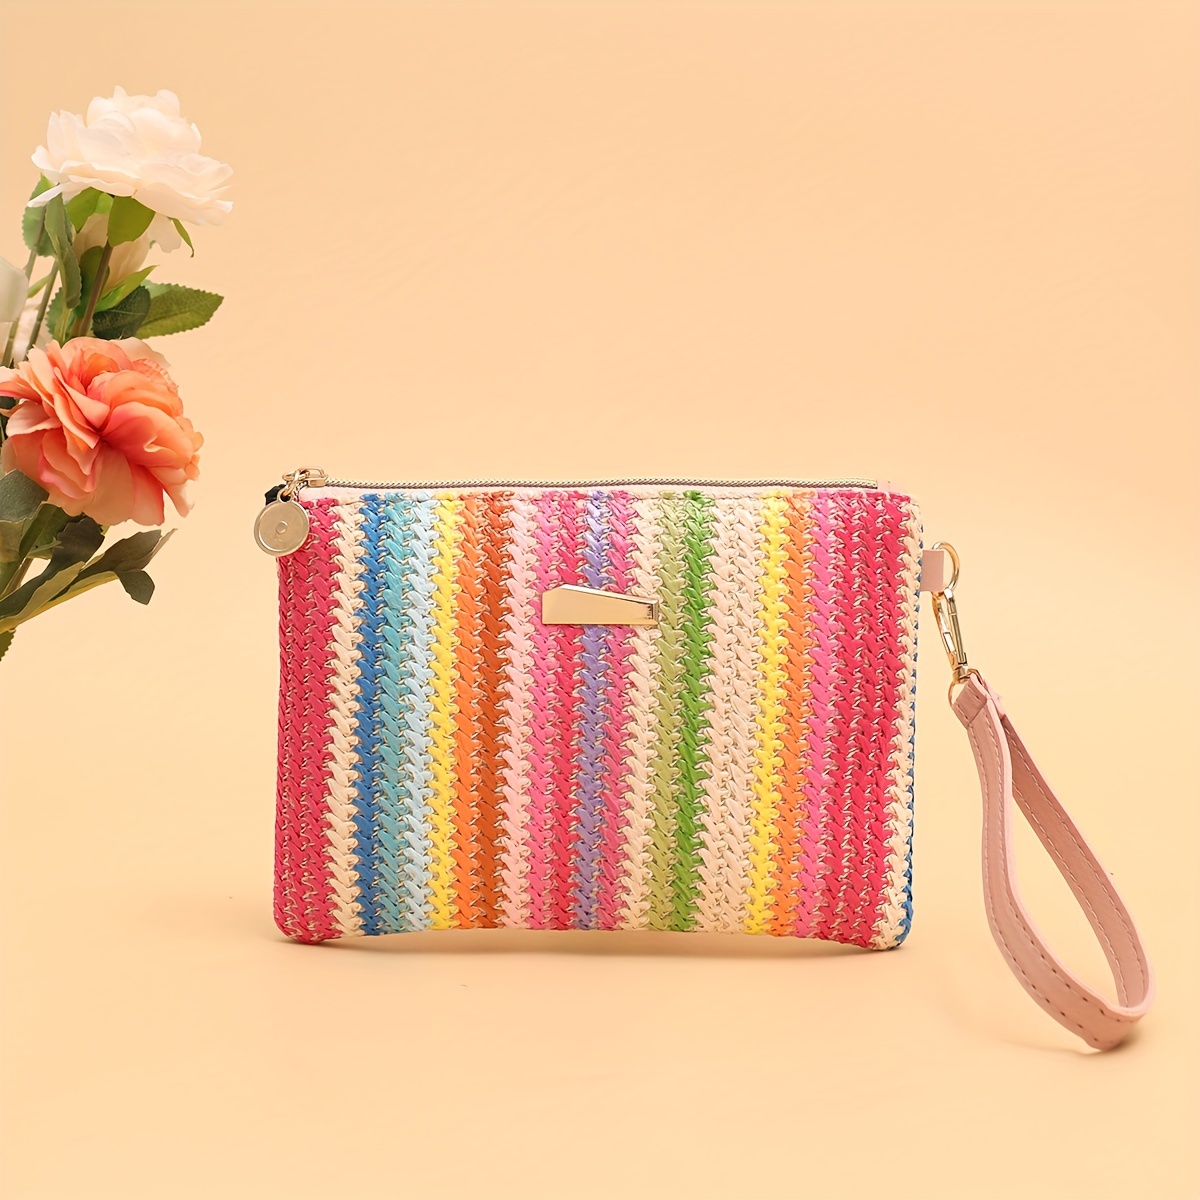 

Mini Multi-color Wave Embroidery Clutch Purse With Detachable Strap, Fashionable Casual Handheld Bag, For Phone, Lipstick, Keys, Essential For Commute And Travel